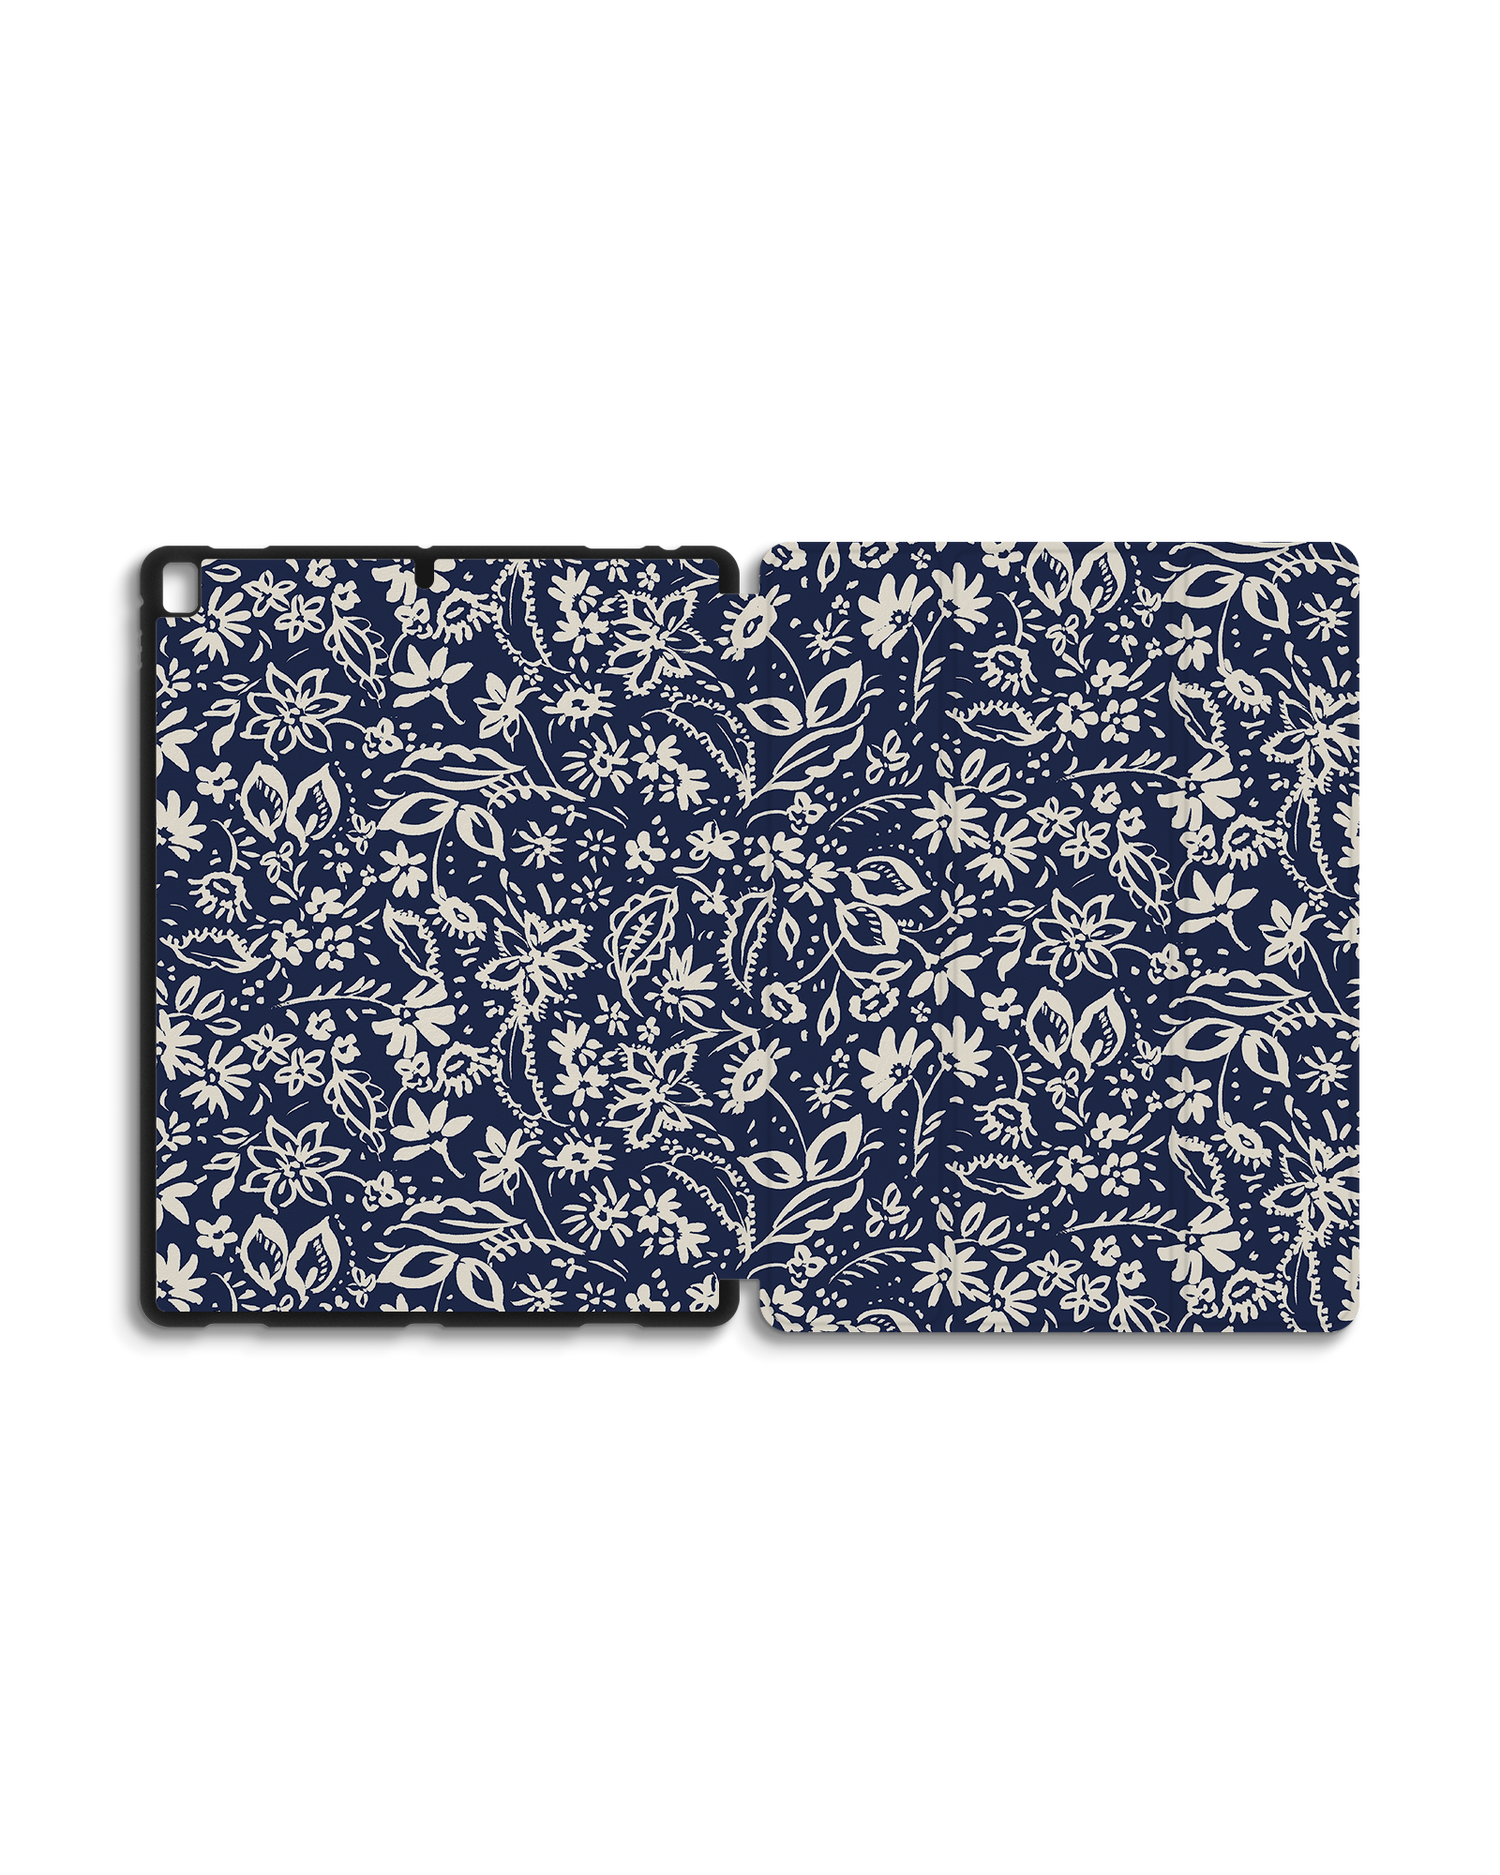 Ditsy Blue Paisley iPad Case with Pencil Holder for Apple iPad Pro 2 12.9